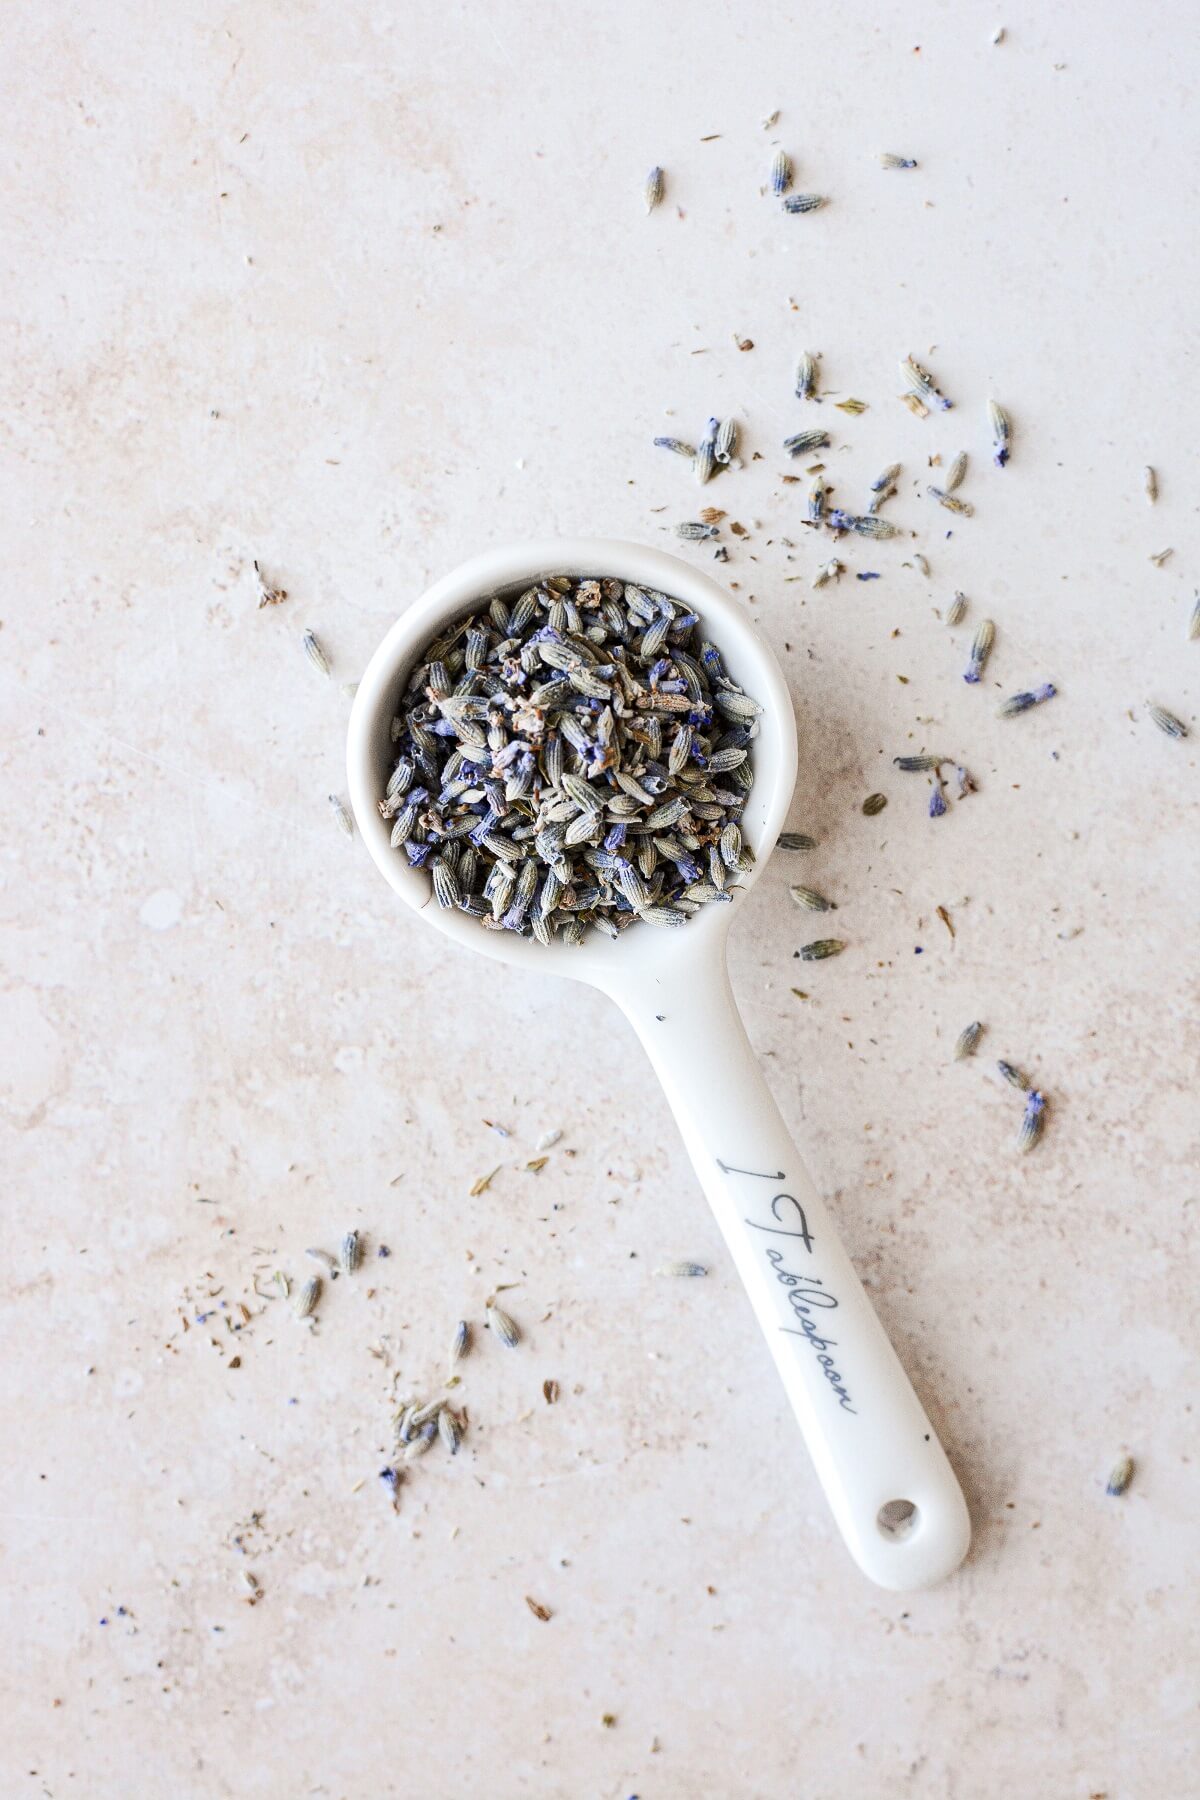 A spoonful of edible lavender.